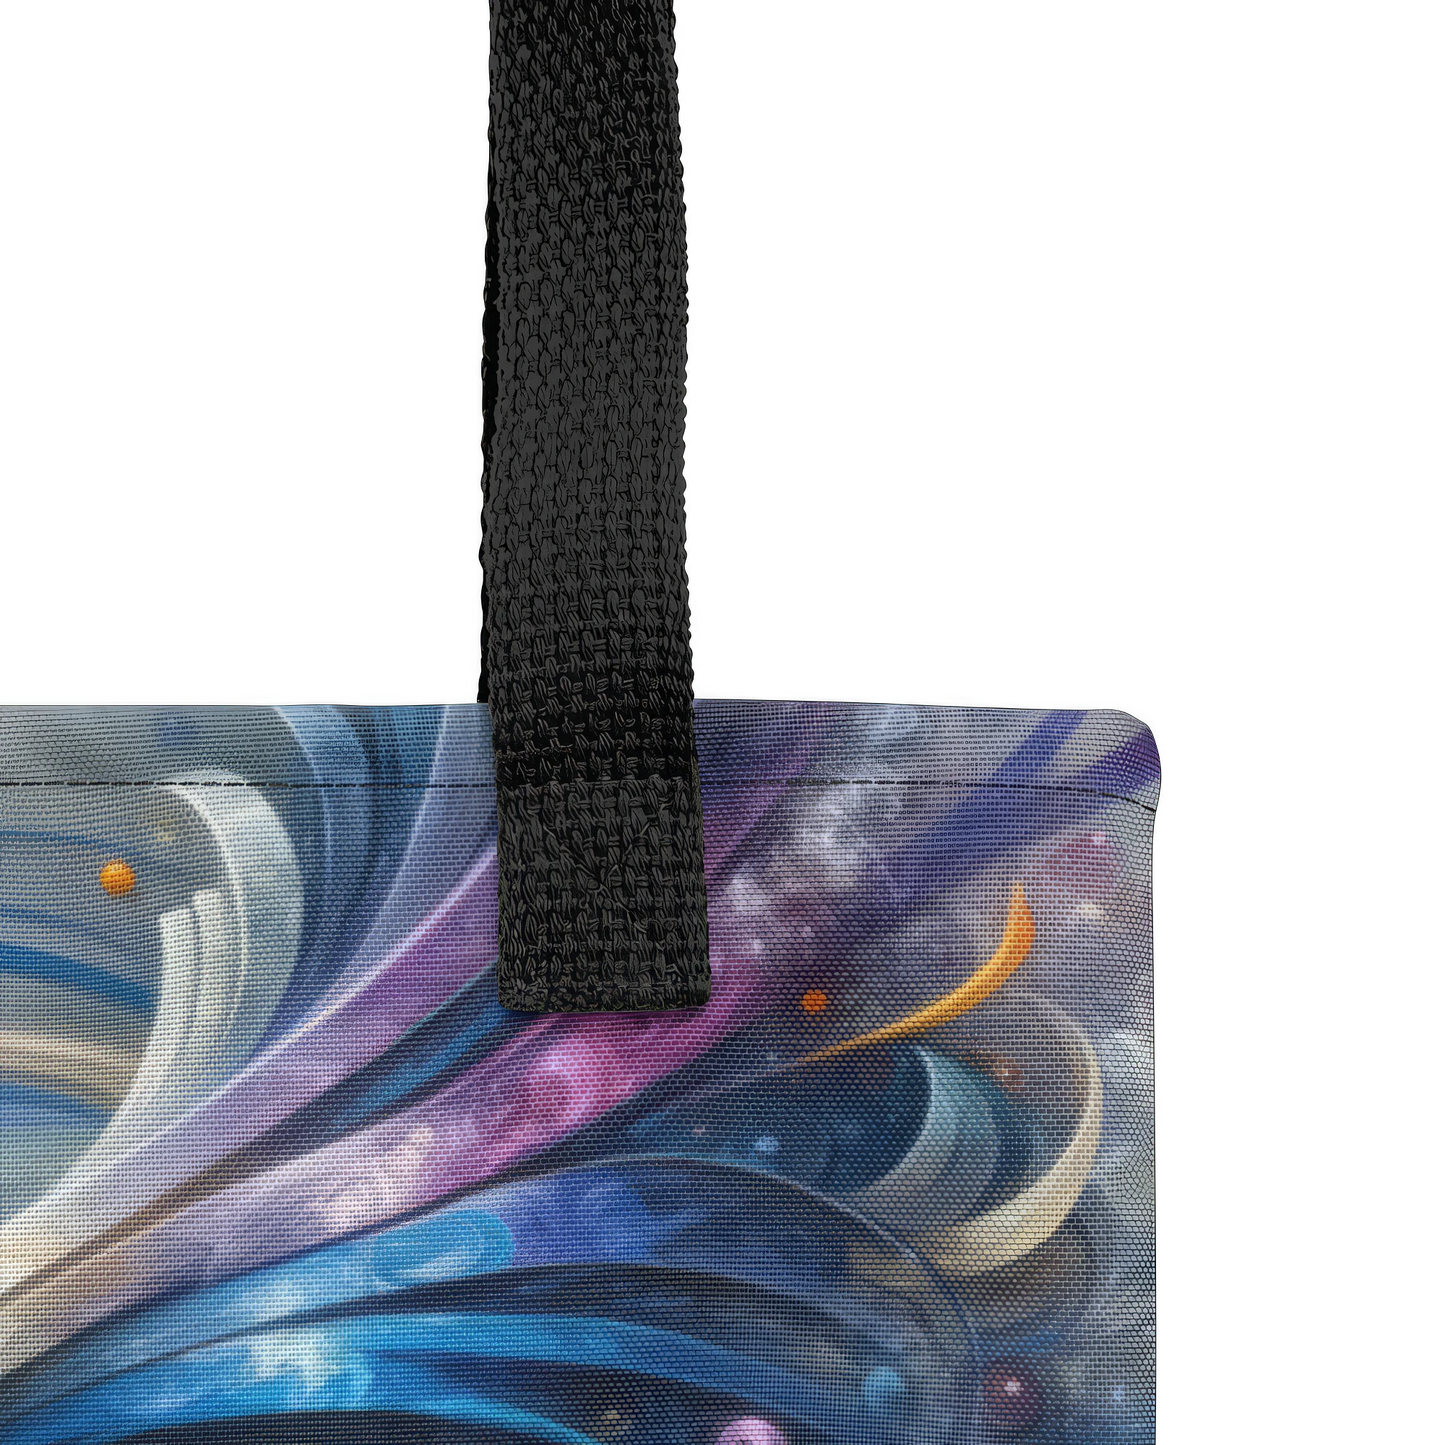 Abstract Art Tote Bag: Synthetic Symphony